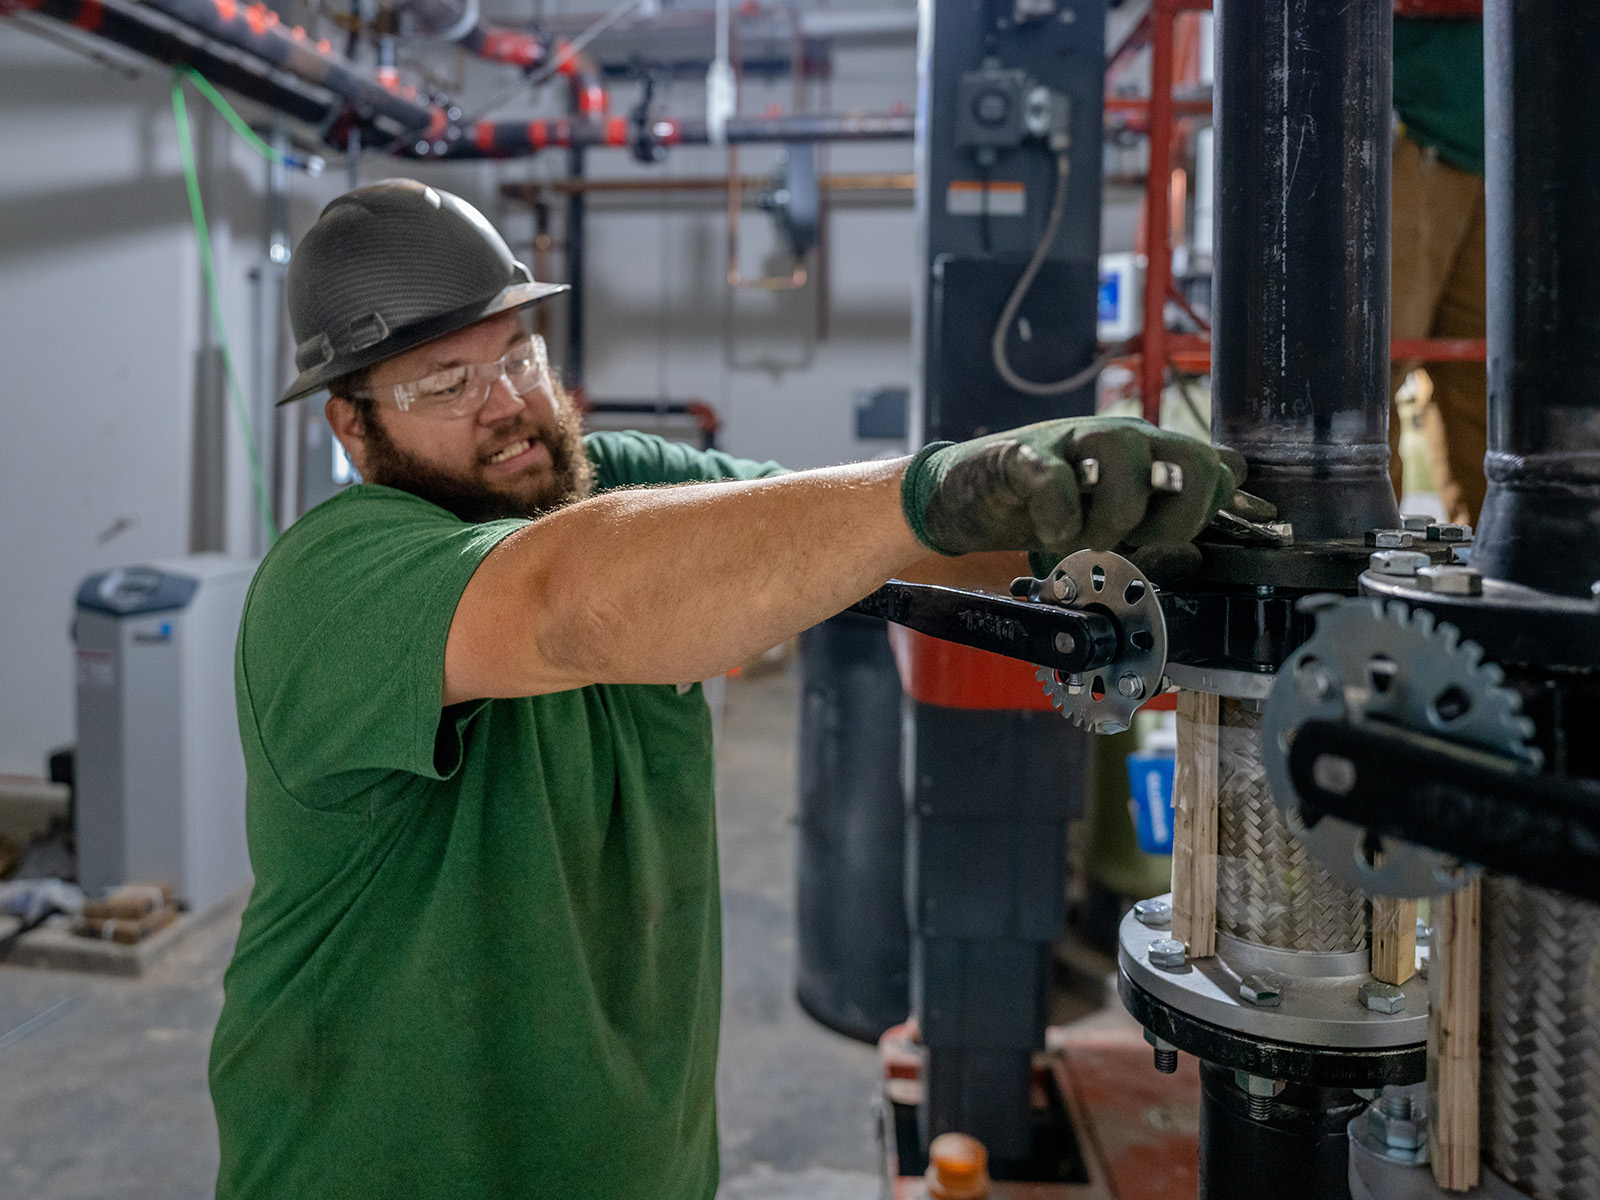 Chris Perkins, McElroy’s plumbing/pipefitting technician, constructs a piping system at Washburn University School of Law.